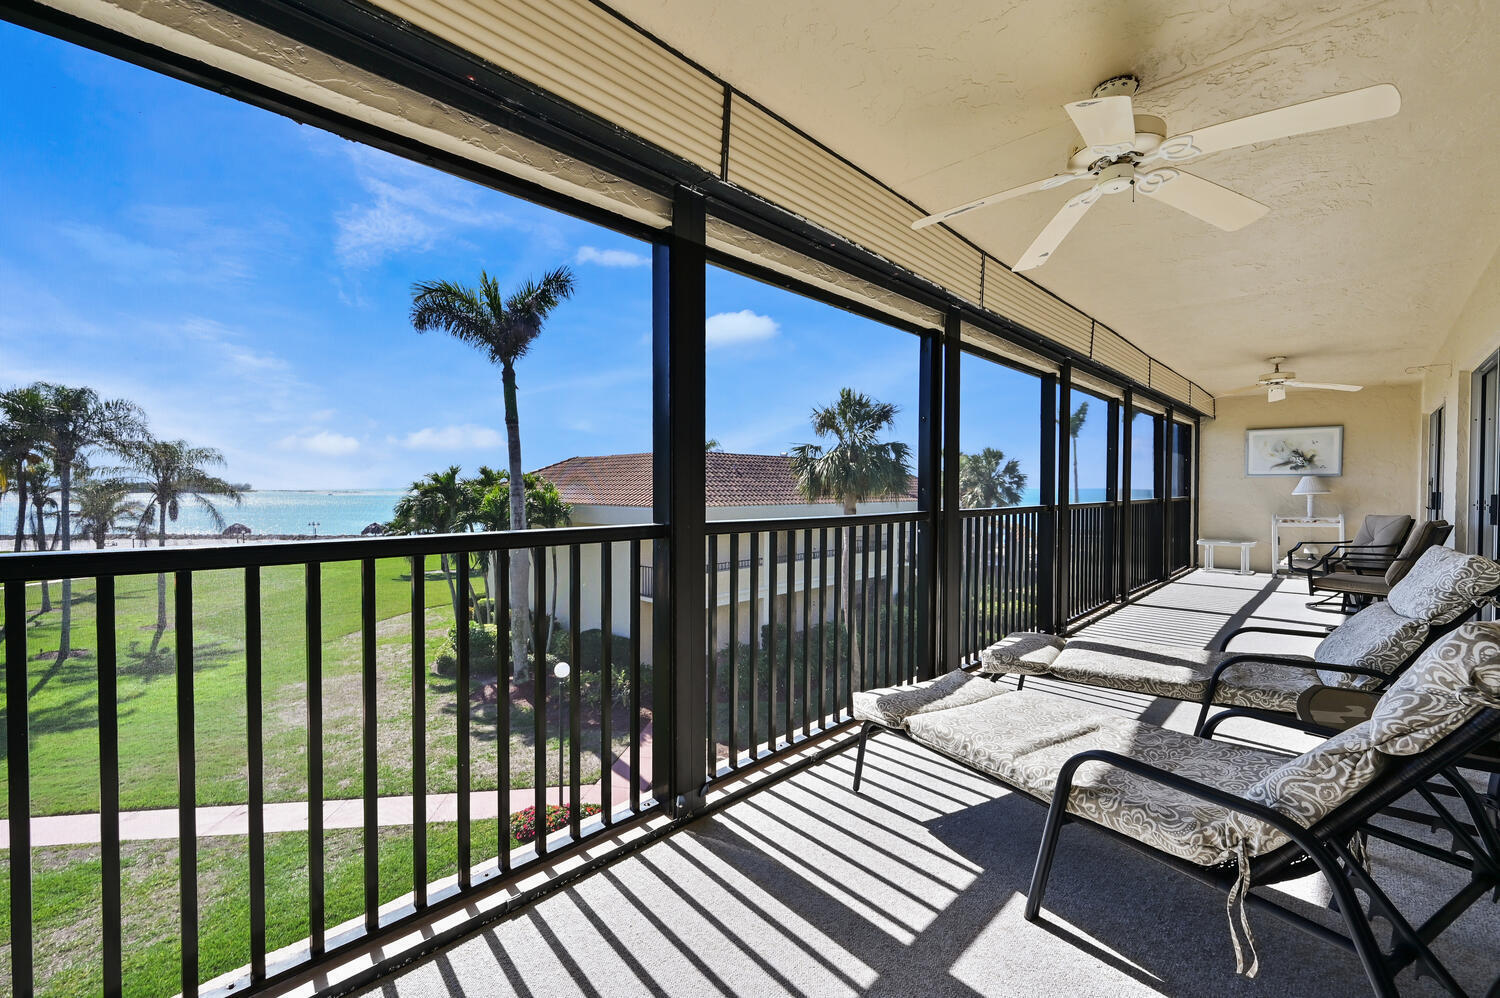 1080 S Collier Boulevard Unit 301, Marco Island, Florida, 34145, United States, 2 Bedrooms Bedrooms, ,2 BathroomsBathrooms,Residential,For Sale,1080 s collier BLVD unit 301,1434226